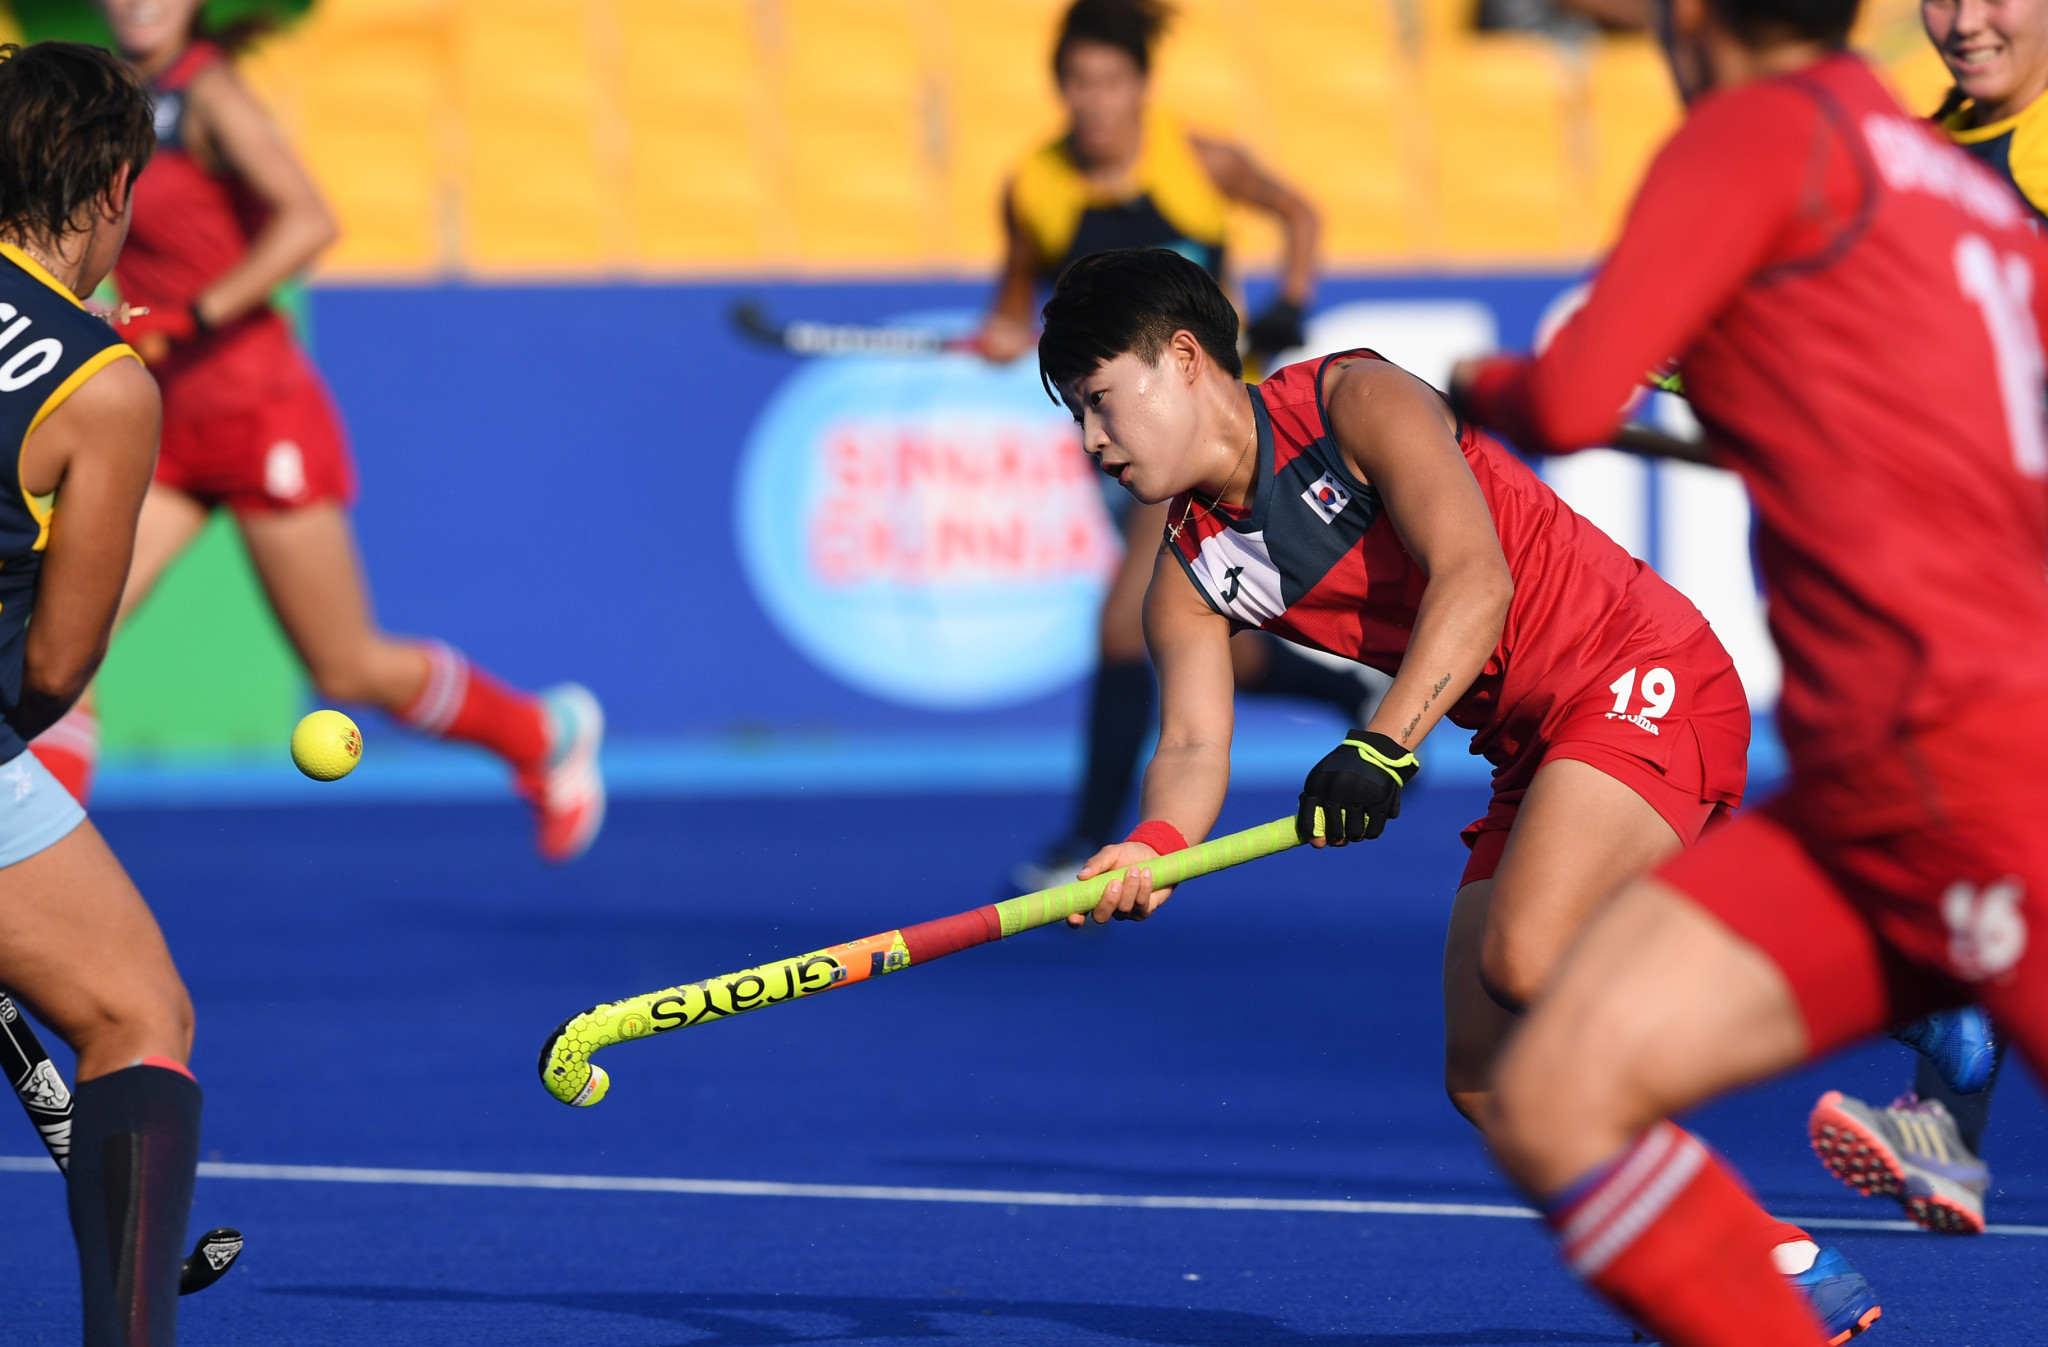 Four thrashings handed out on final day of Women's Hockey Asia Cup group stage